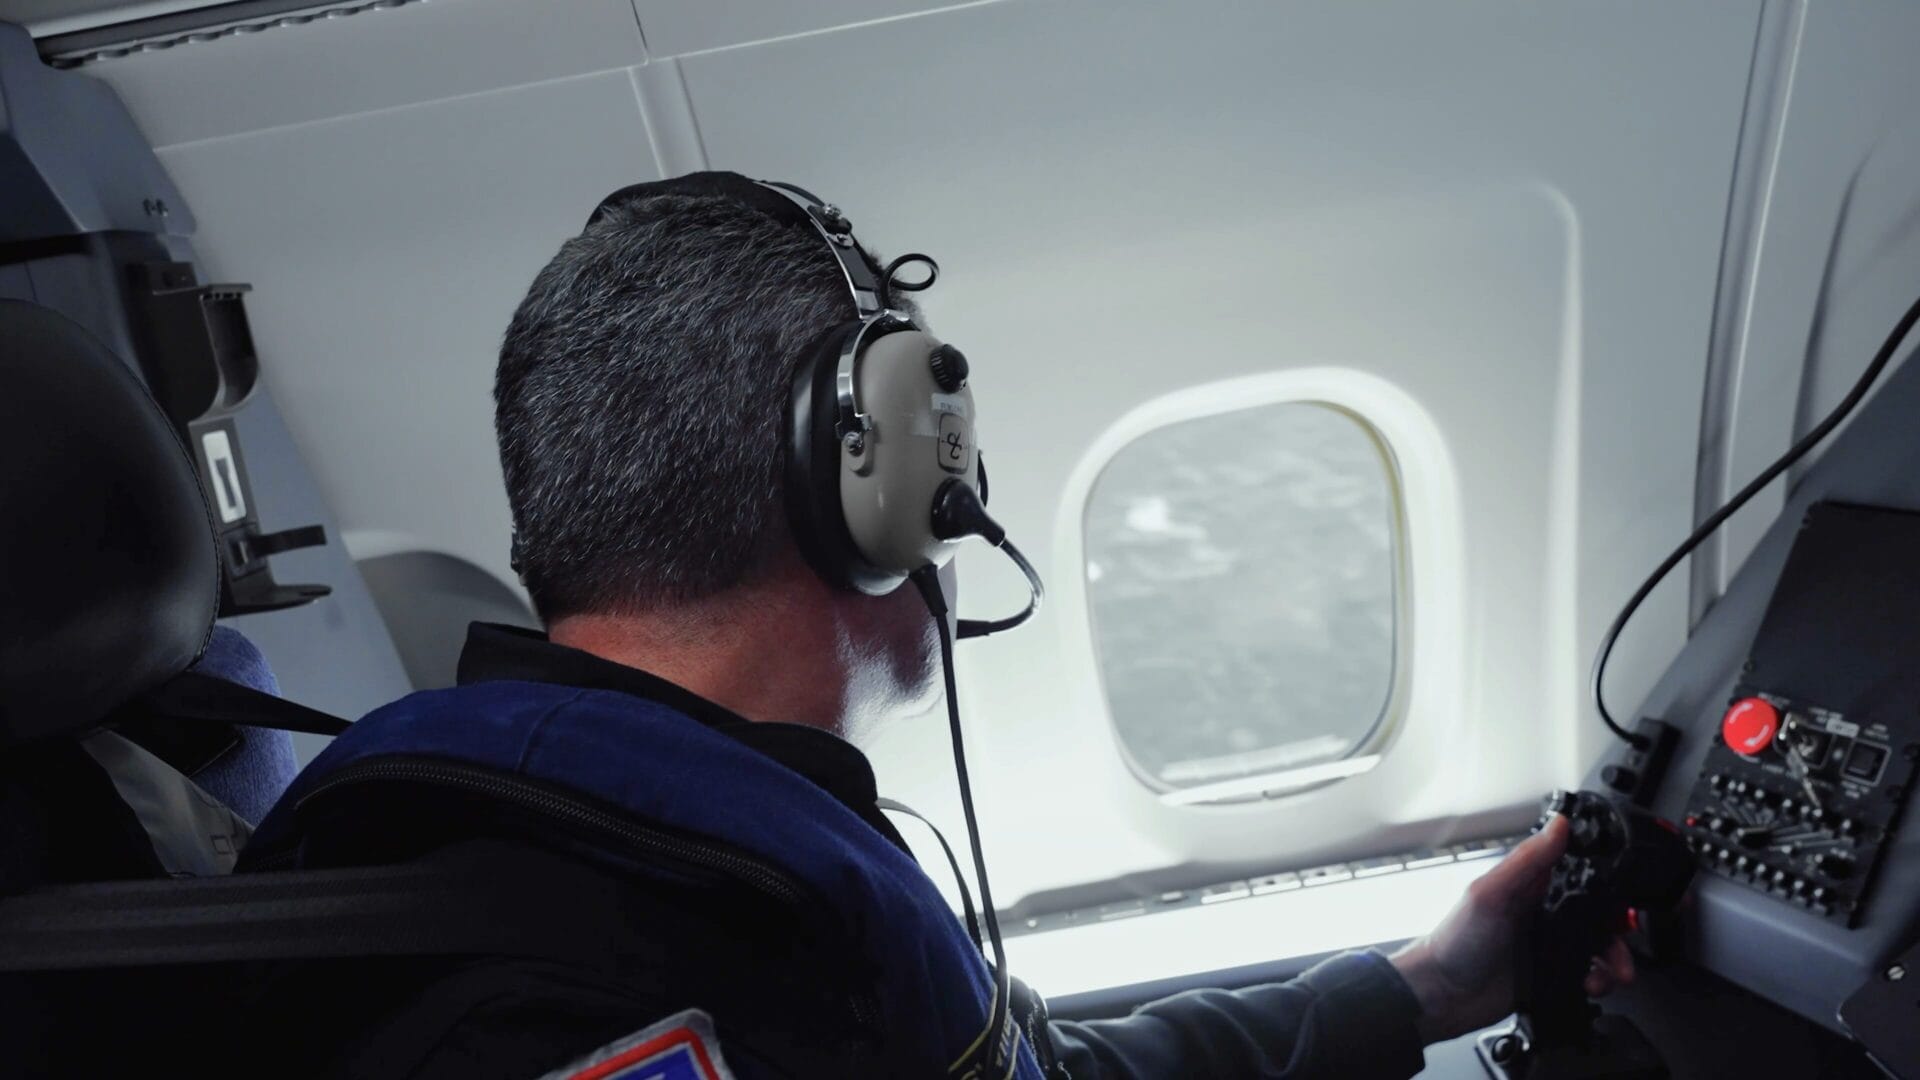 Sensor operator at workstation looking out window of aircraft over the ocean